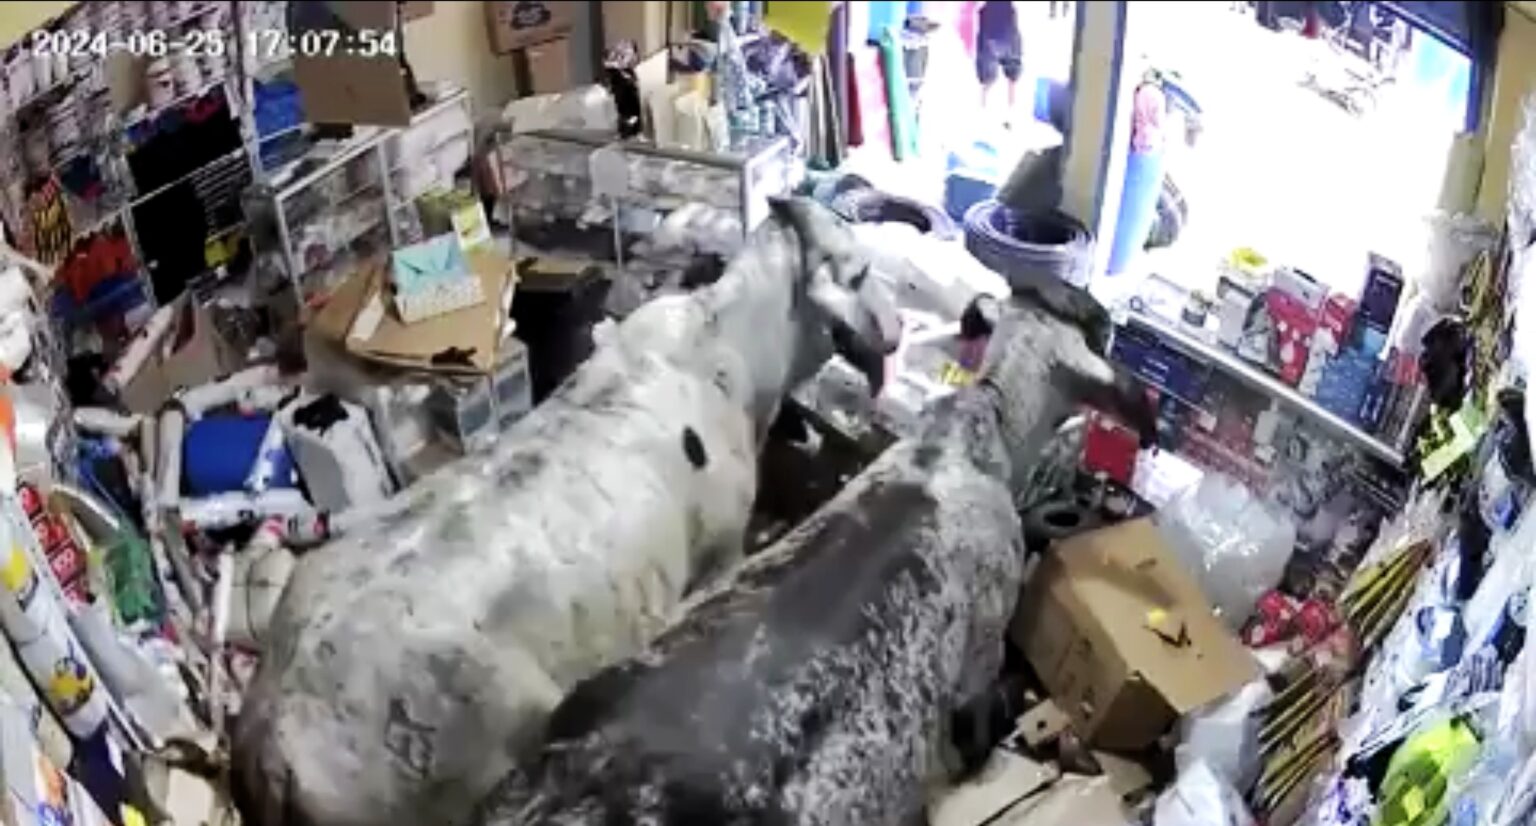 Two cows stormed a store in Corinto, Colombia, causing chaos and significant damage. Locals eventually managed to remove the animals safely. No injuries reported.